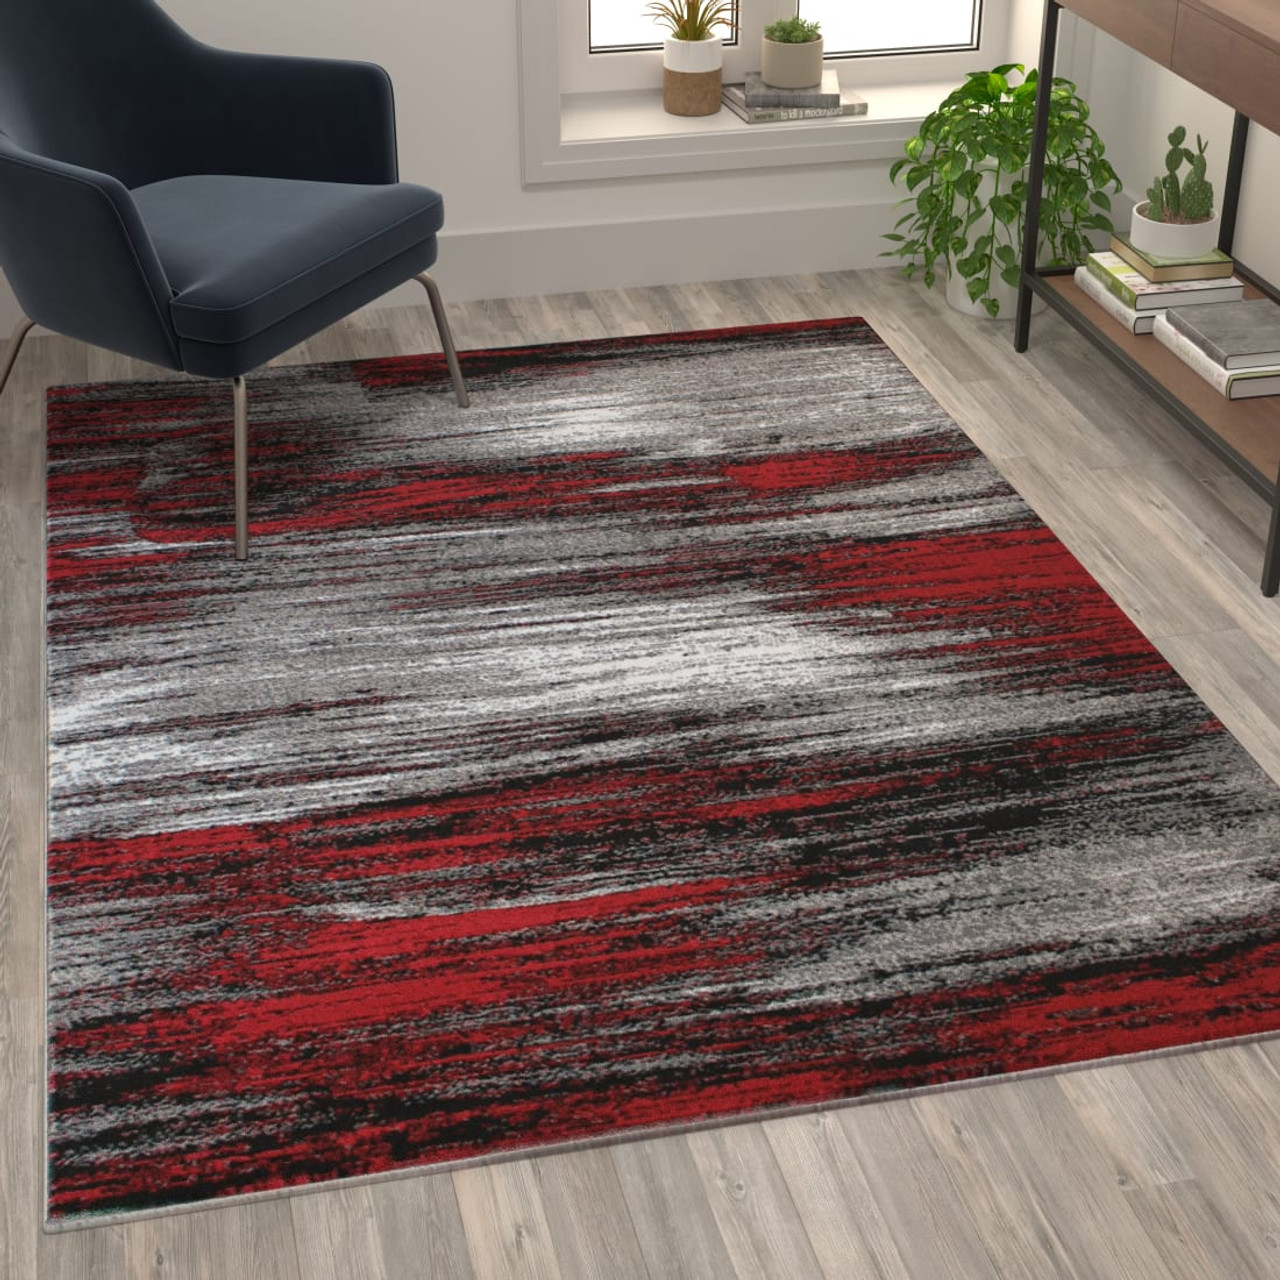 Rylan Collection 5' x 7' Red Scraped Design Area Rug - Olefin Rug with Jute Backing